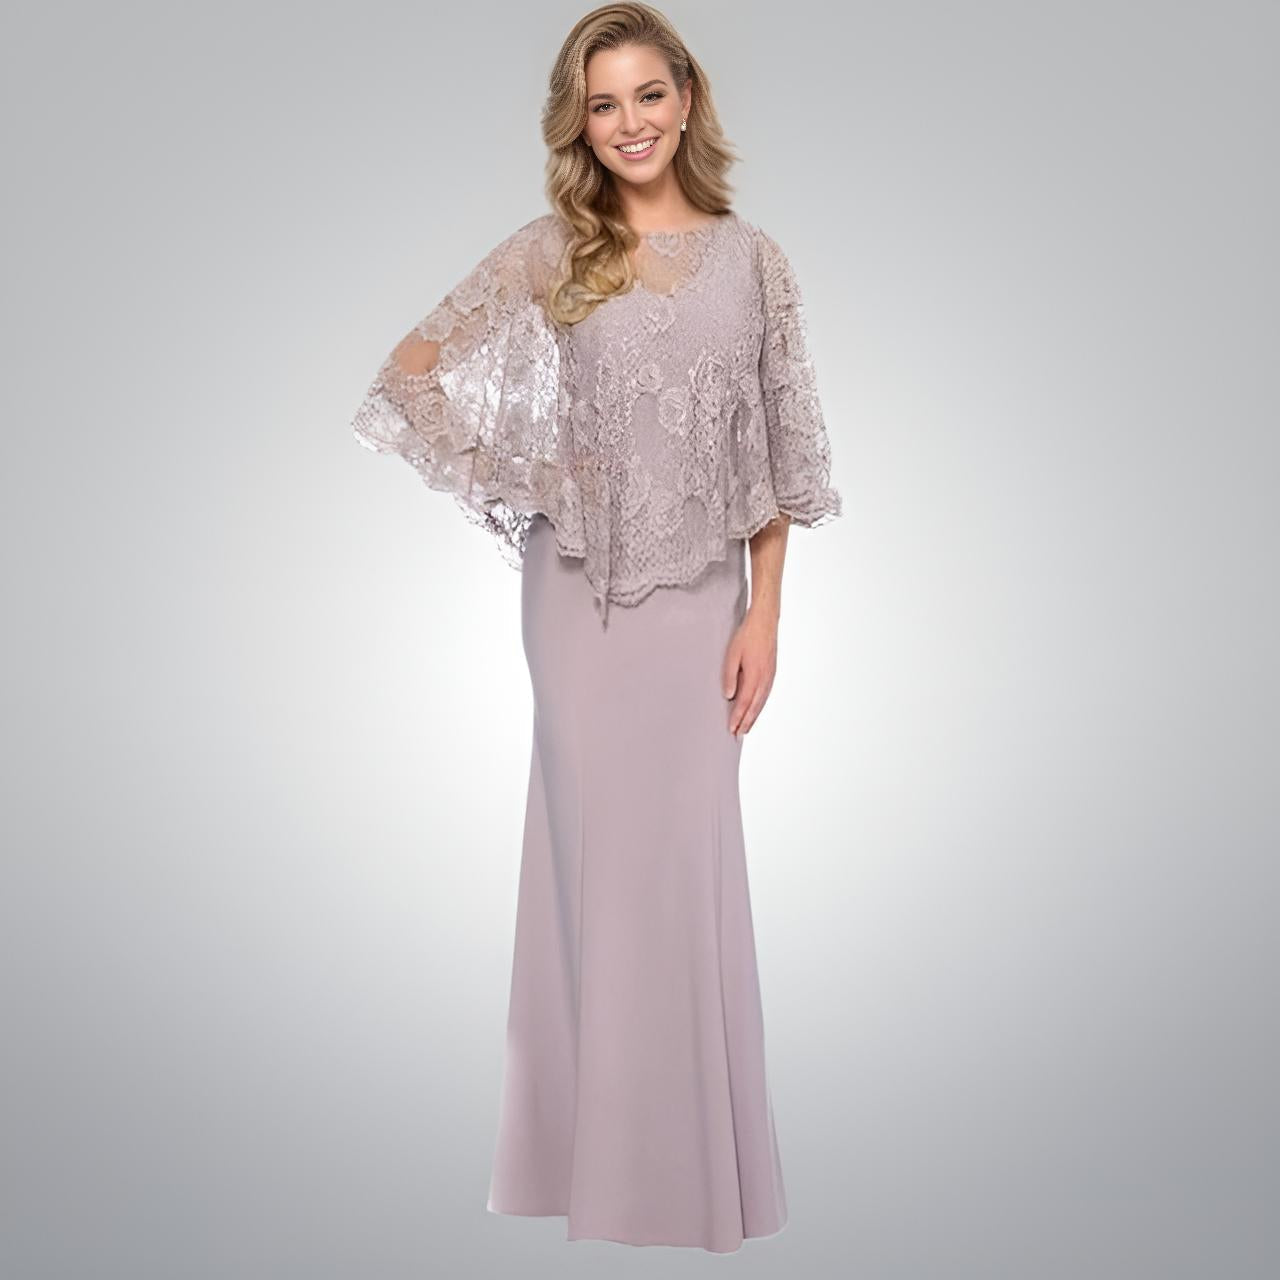 Mother of the Bride in Light Purple Dress with Lace Top Bolero